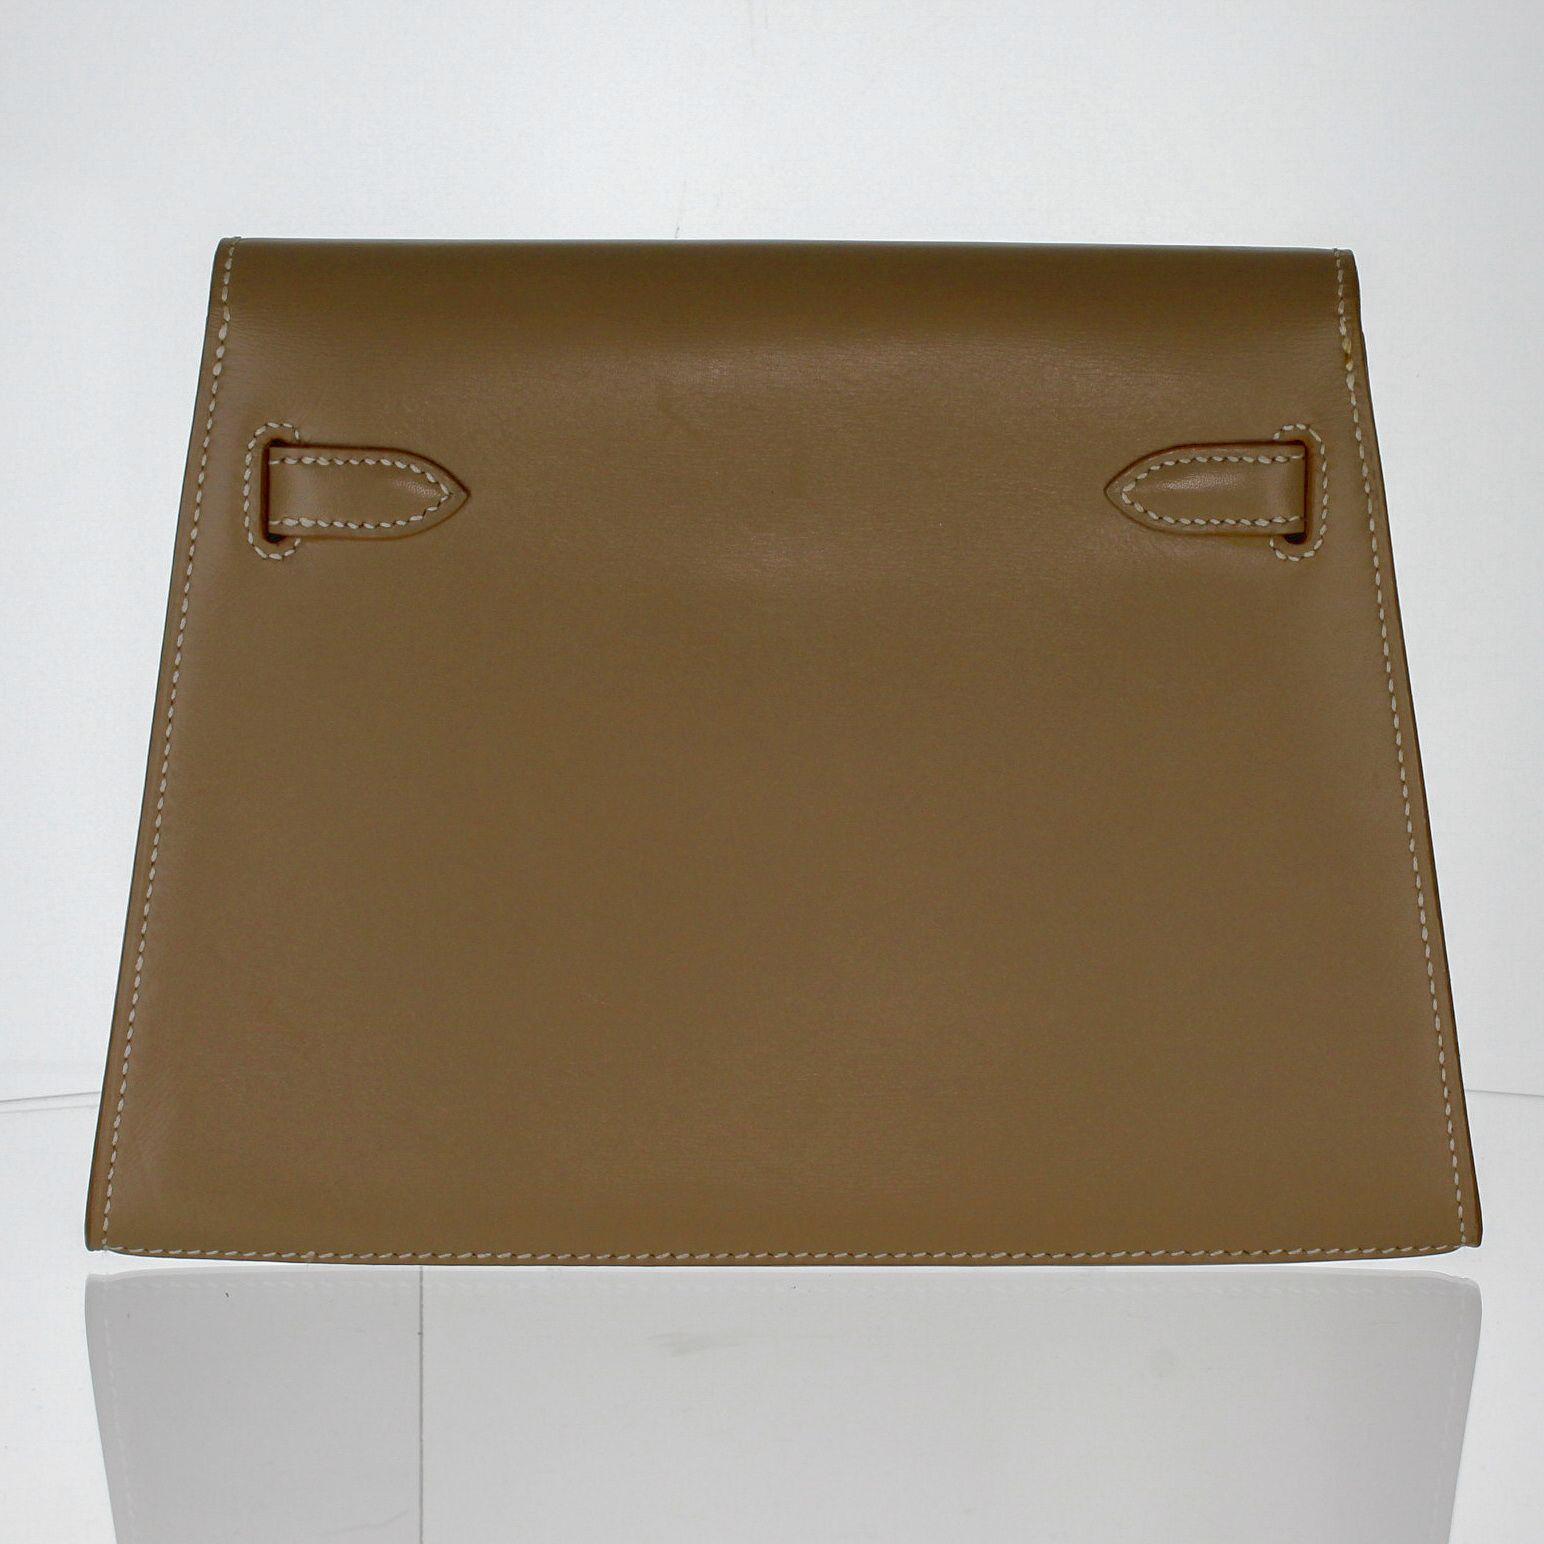 Hermes Clutch | Design With Consignment, LLC